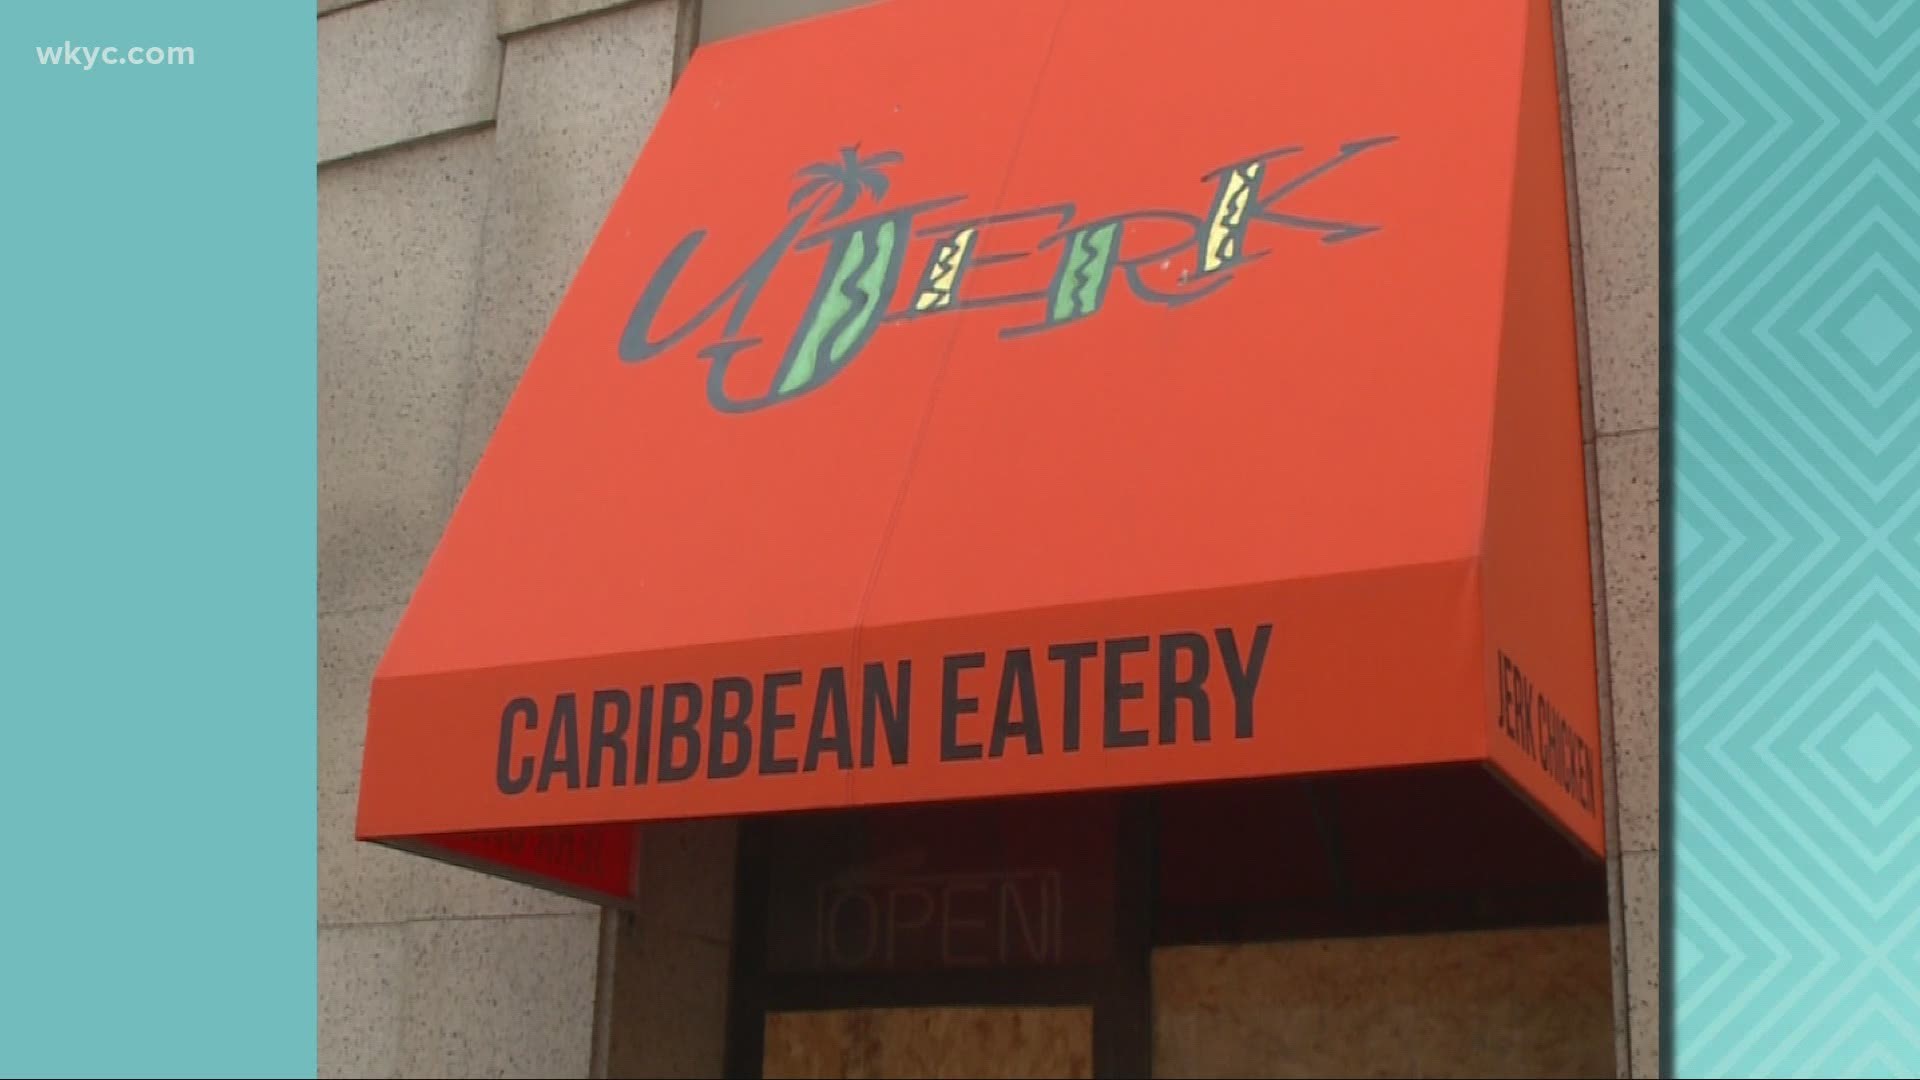 3News food expert Doug Trattner introduces us to the newest spot opening in Downtown Cleveland. It boasts Caribbean flavor in the form of salad, sliders and more.